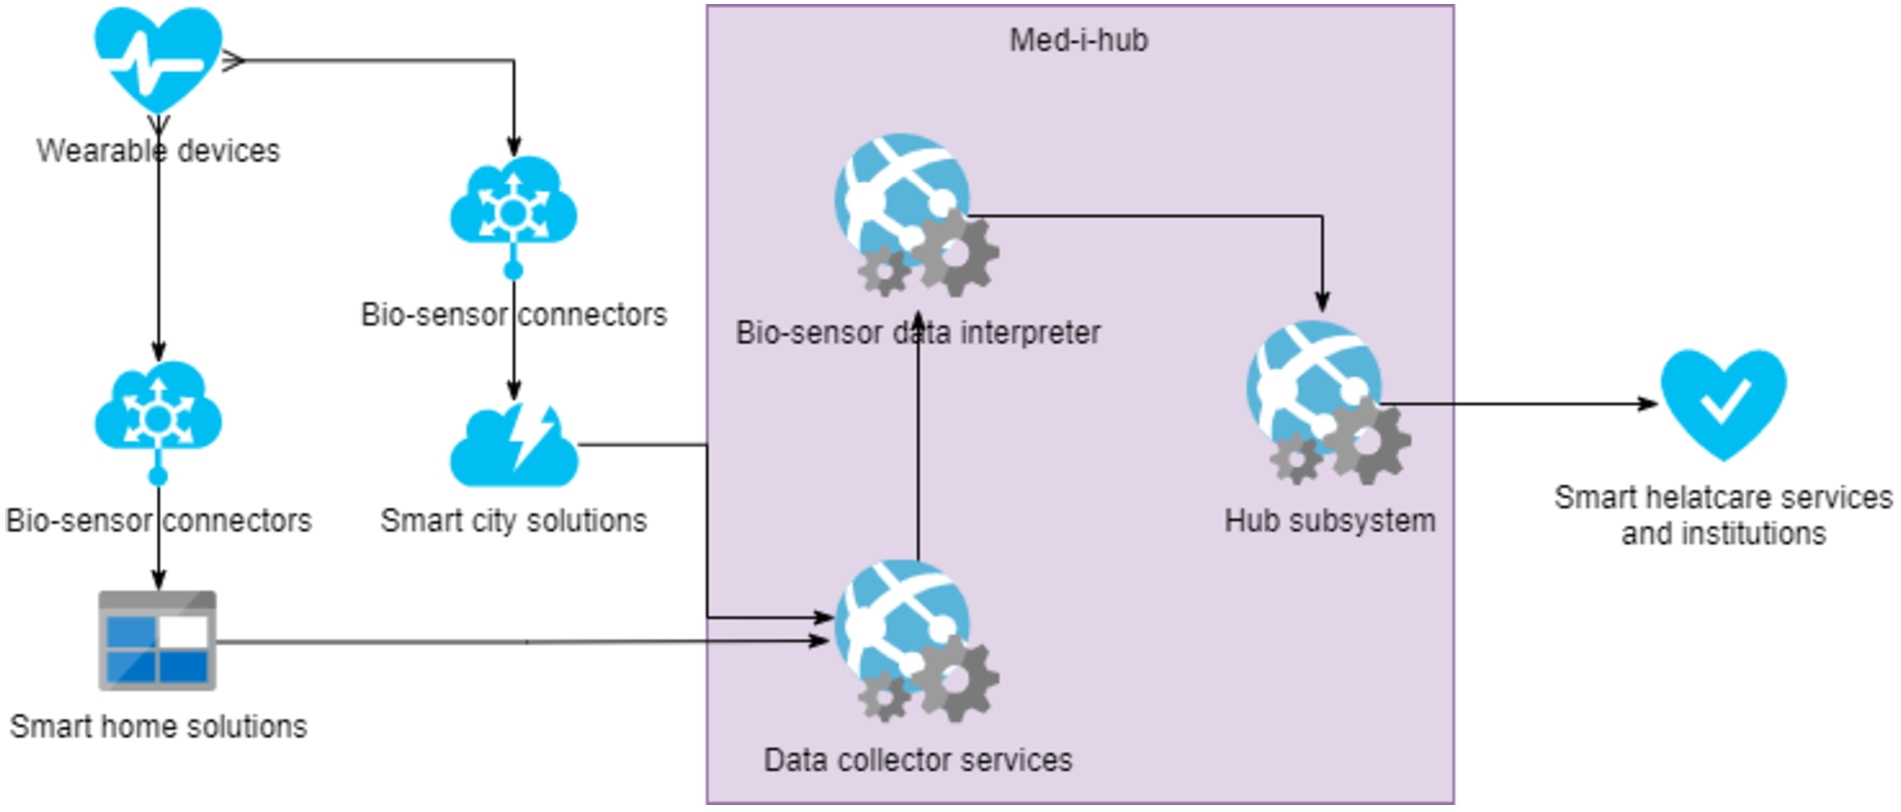 Logical placement of the Med-i-hub system in smart ecosystems.